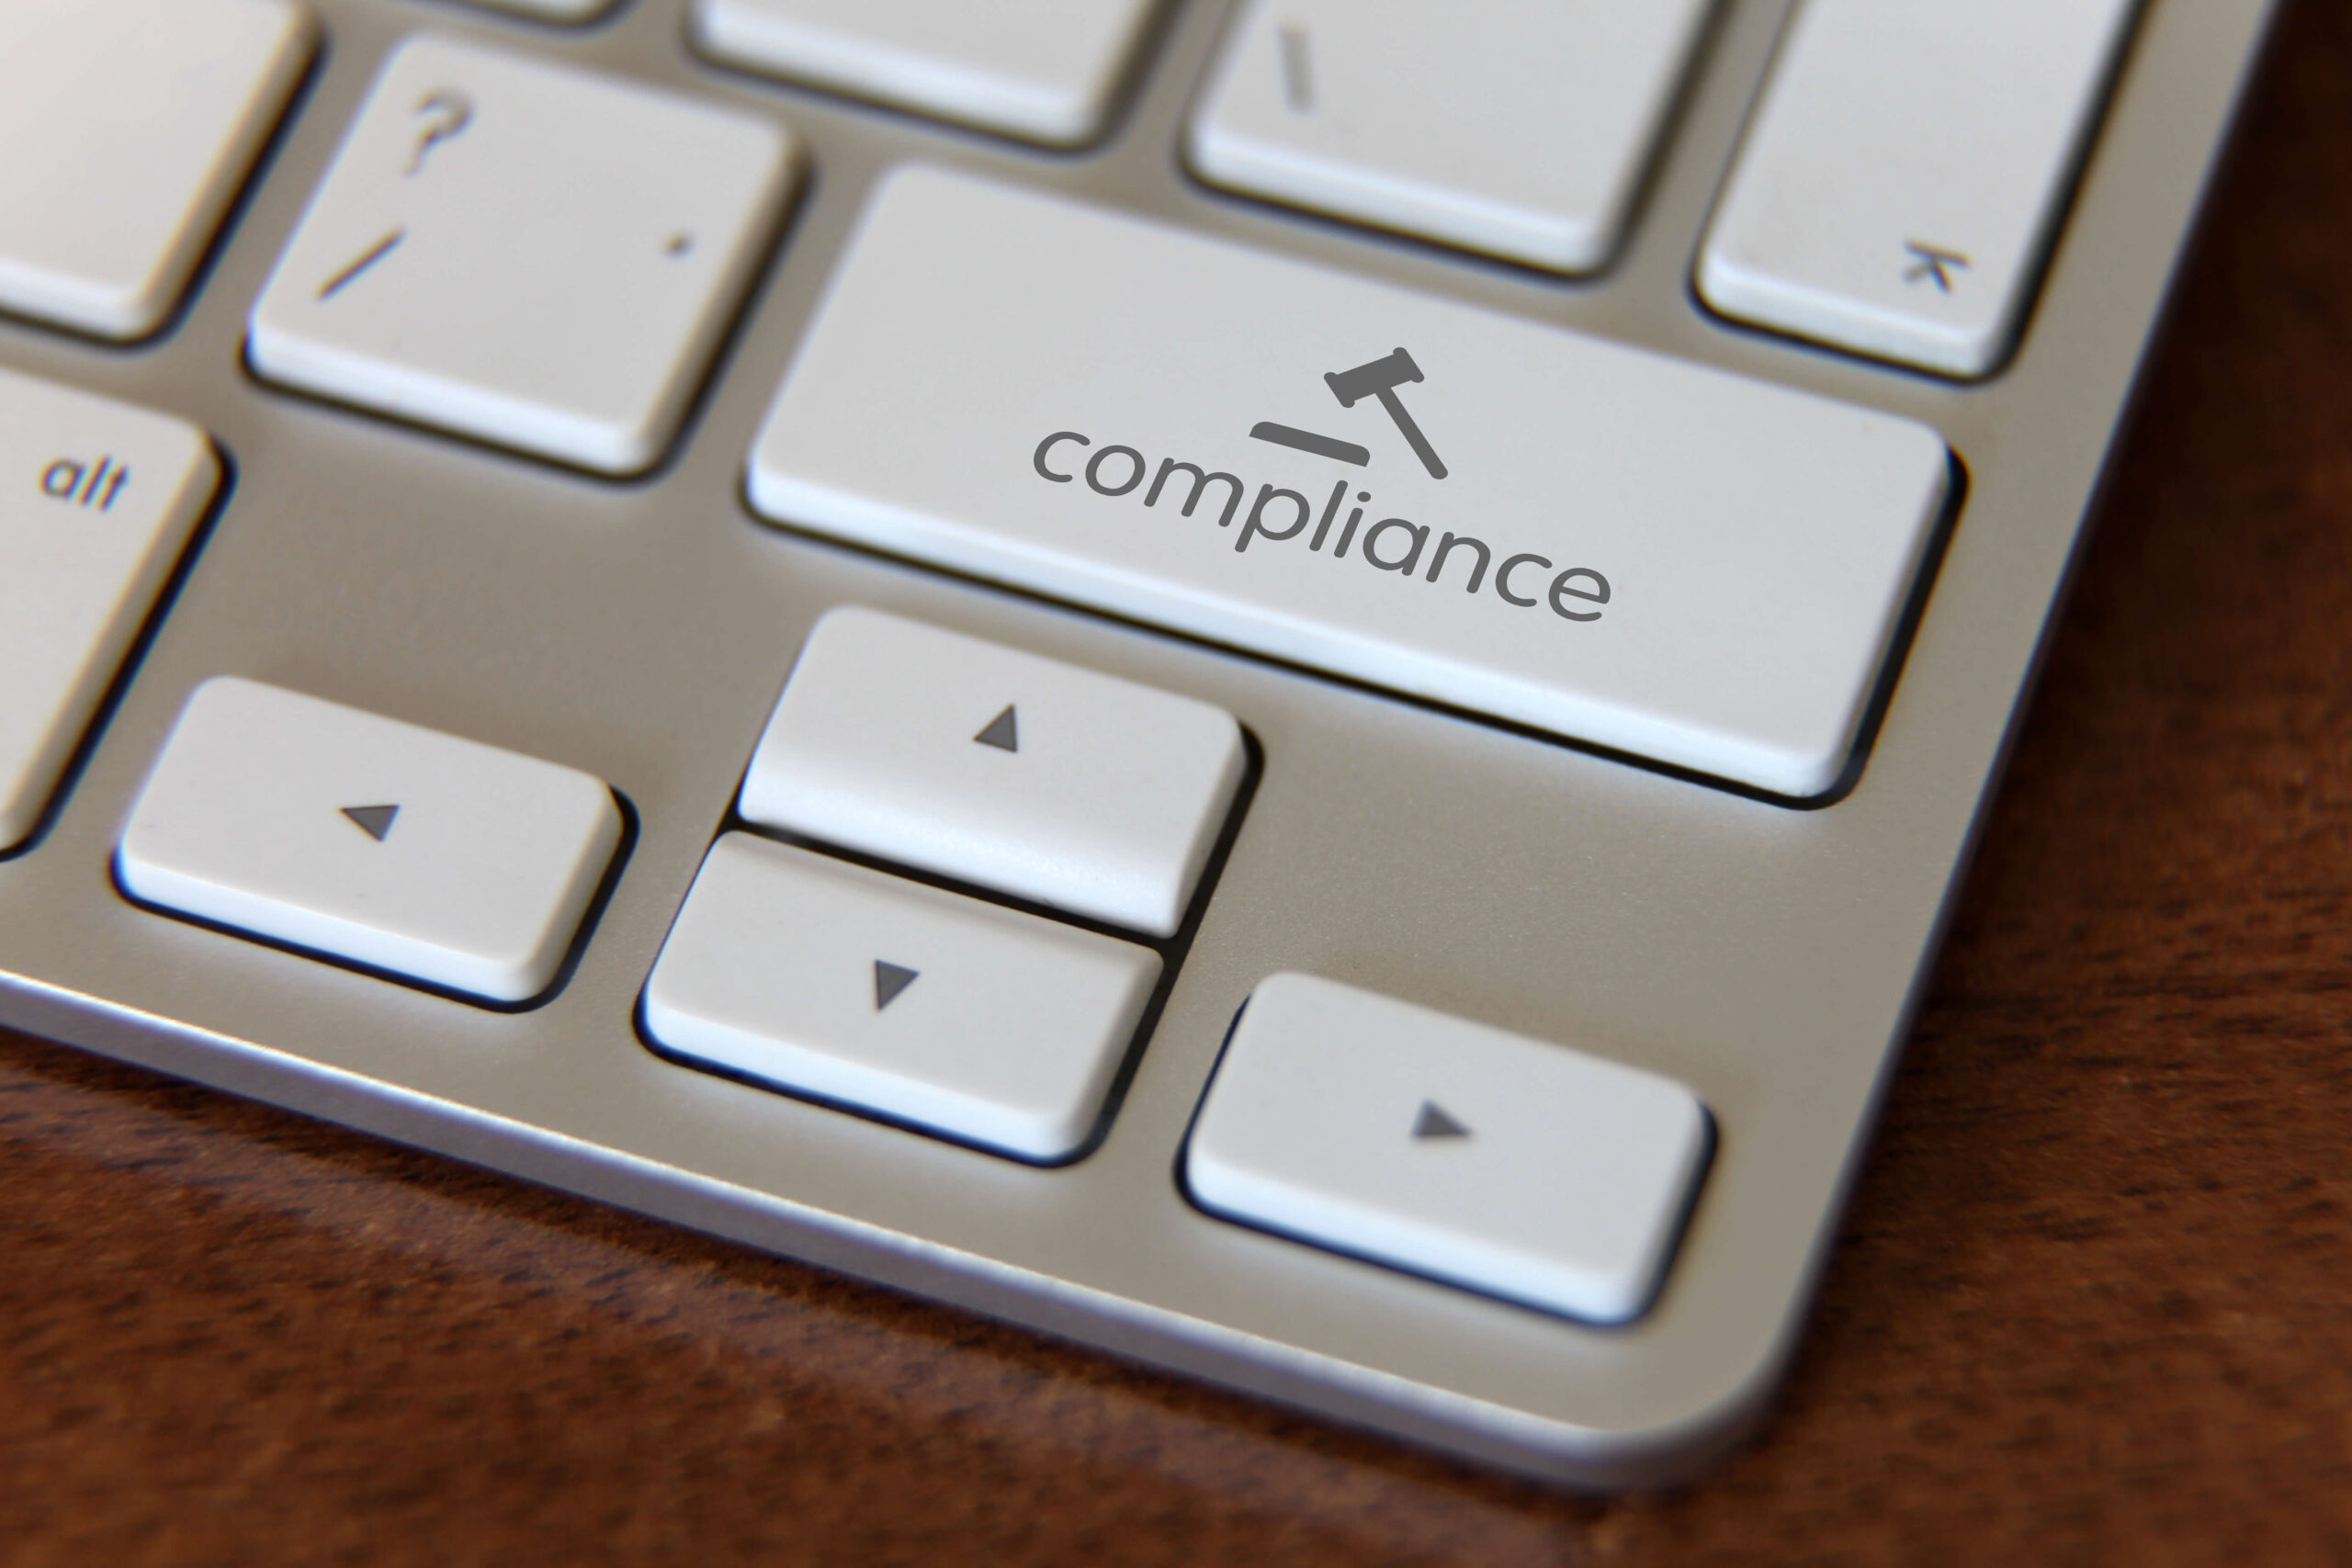 Keyboard with key that says "Compliance" with icon of a gavel.